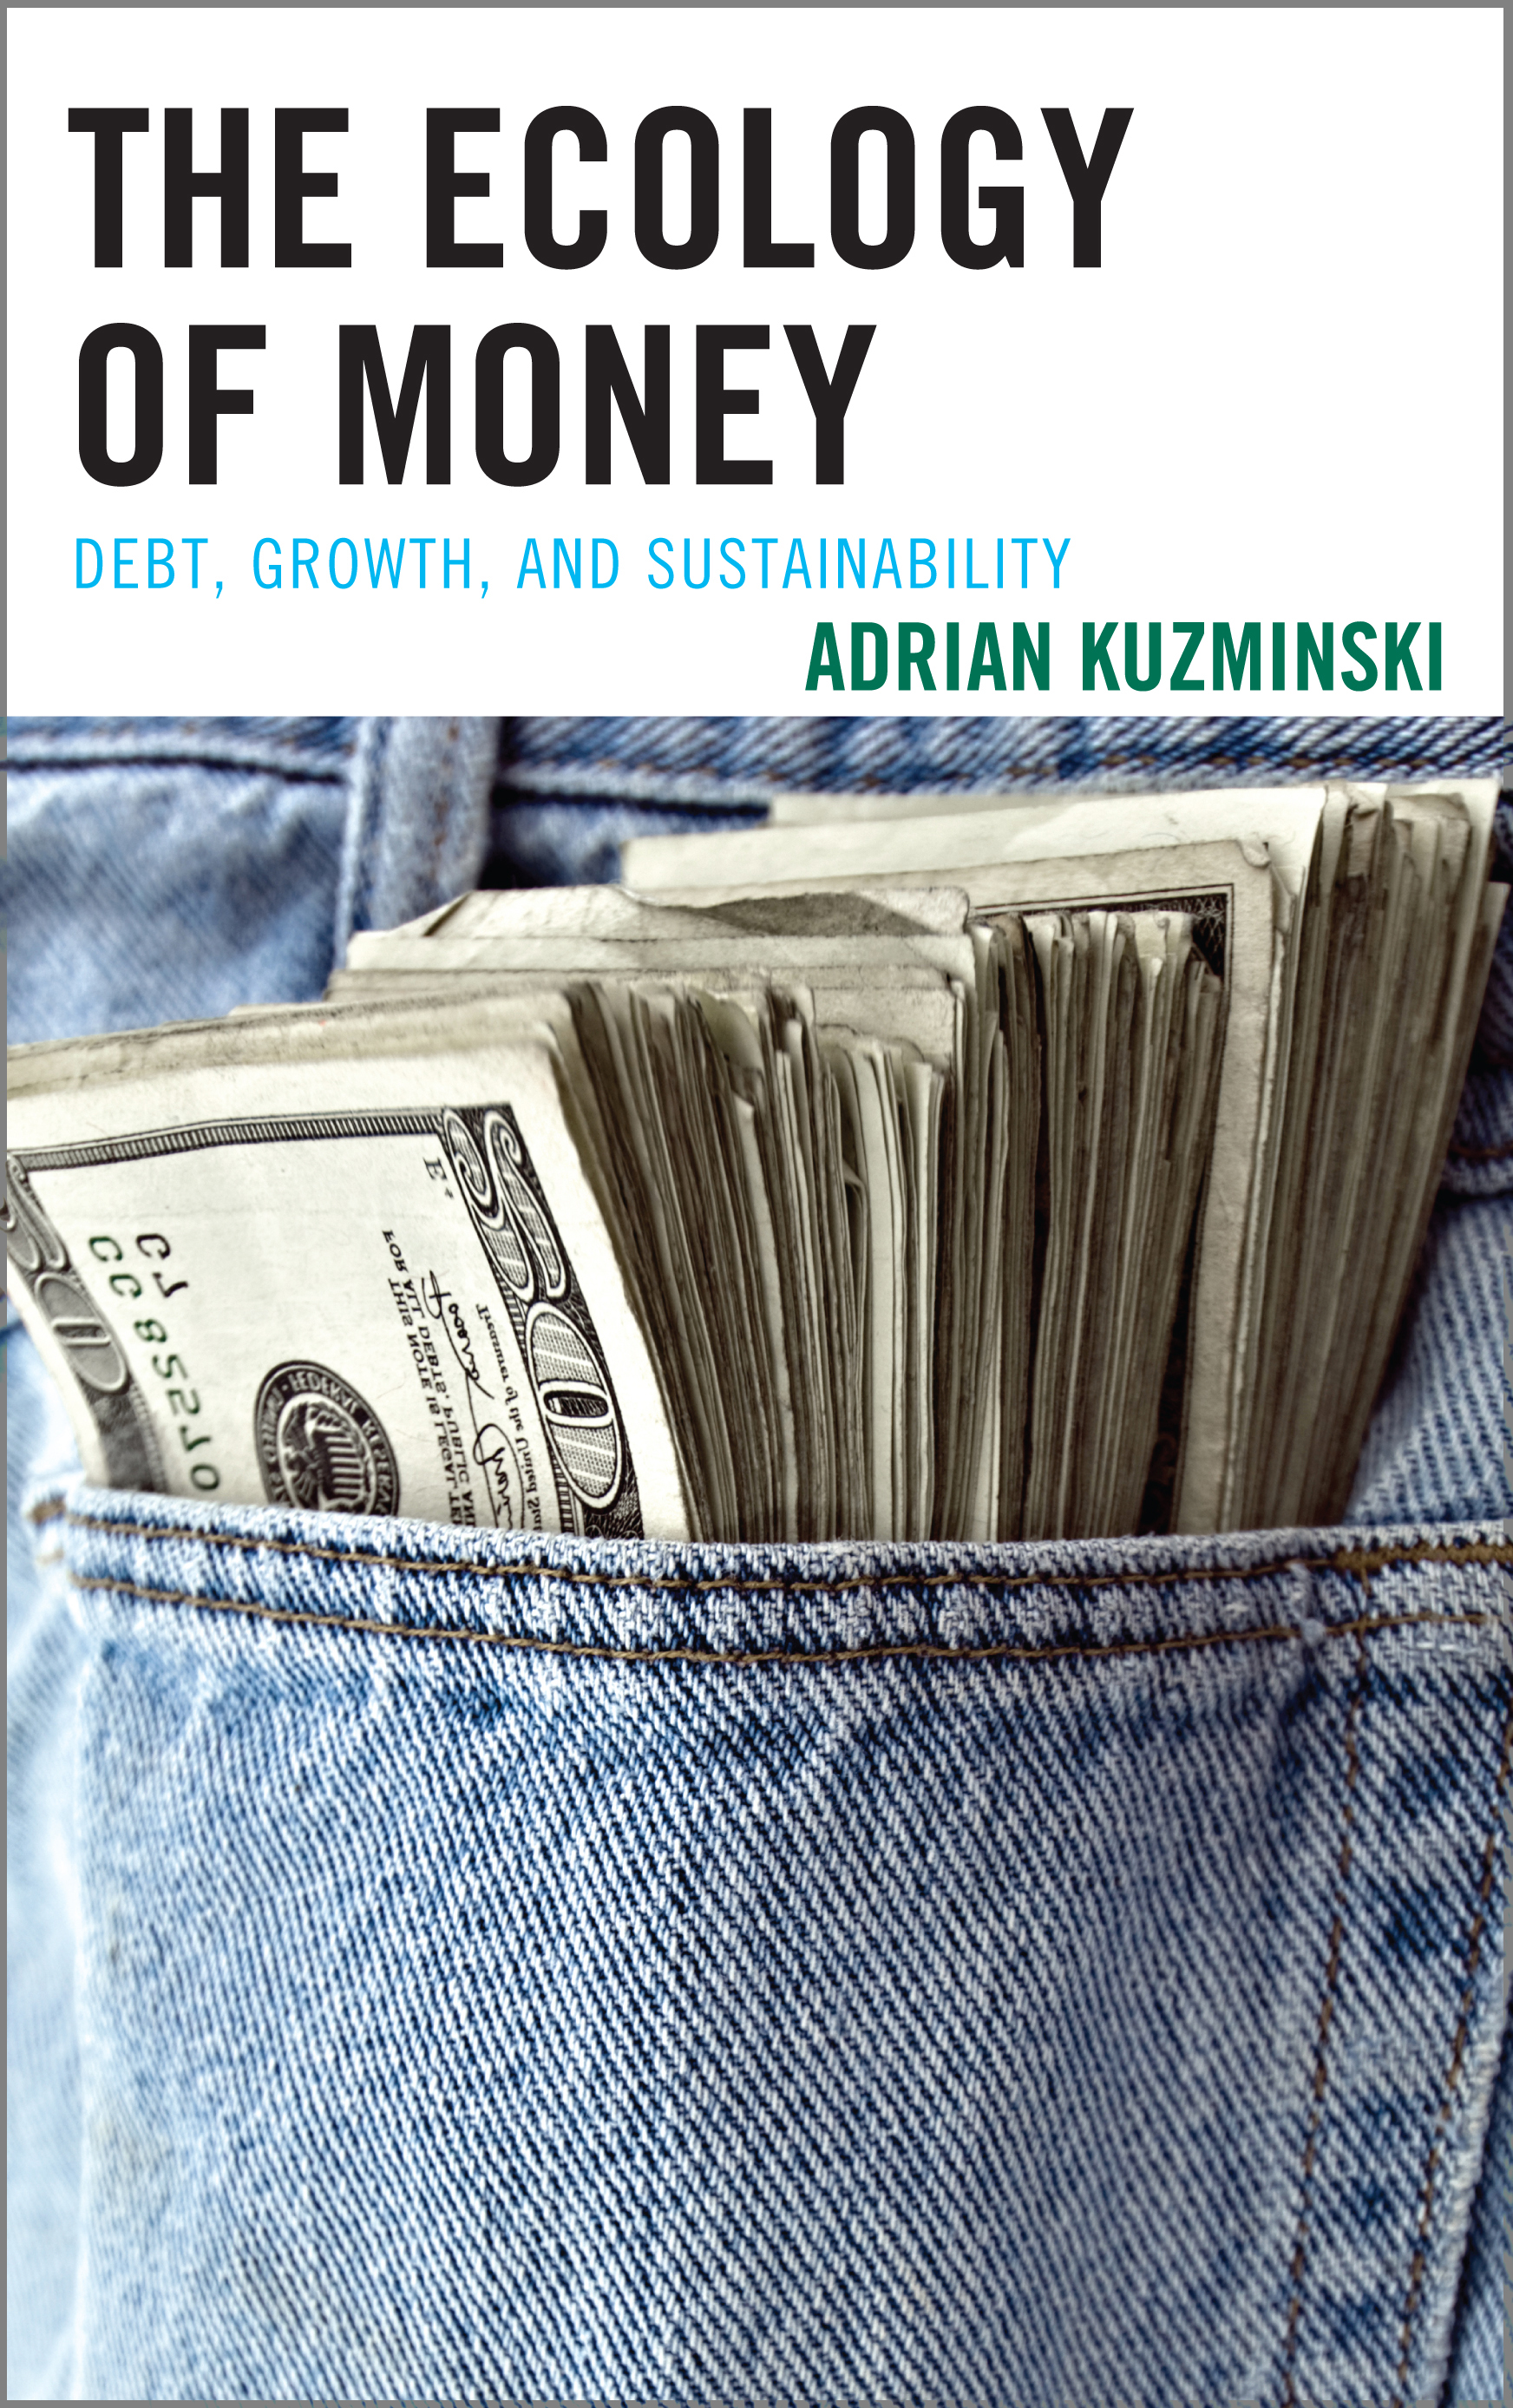 The Ecology of Money: Debt, Growth, and Sustainability